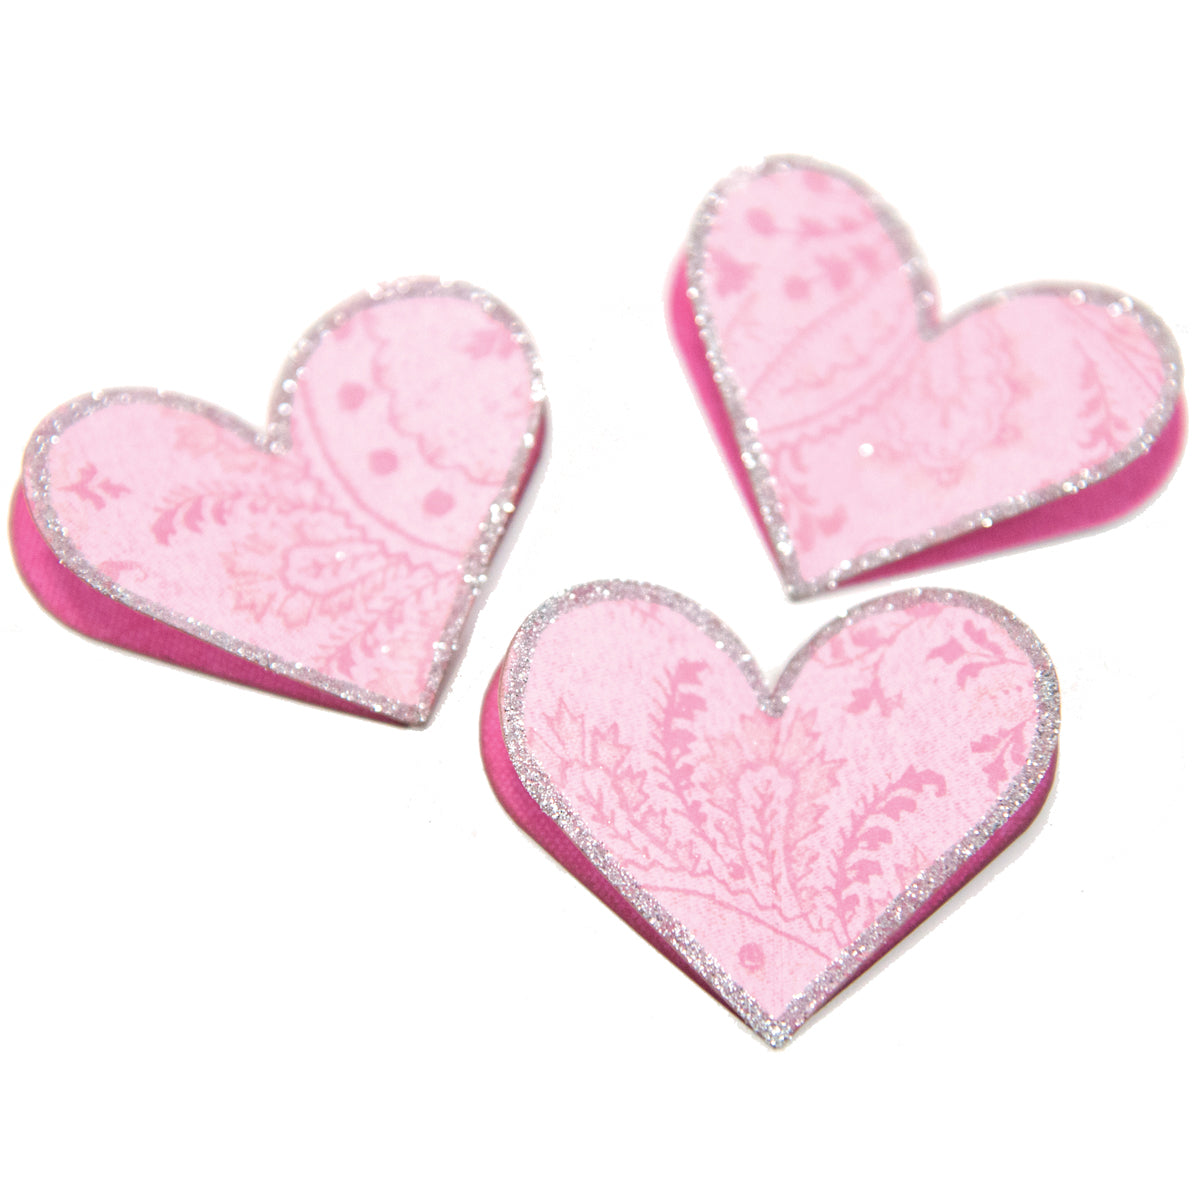 Paper Punch Set - 4 sizes of Hearts for crafts and jewelry making